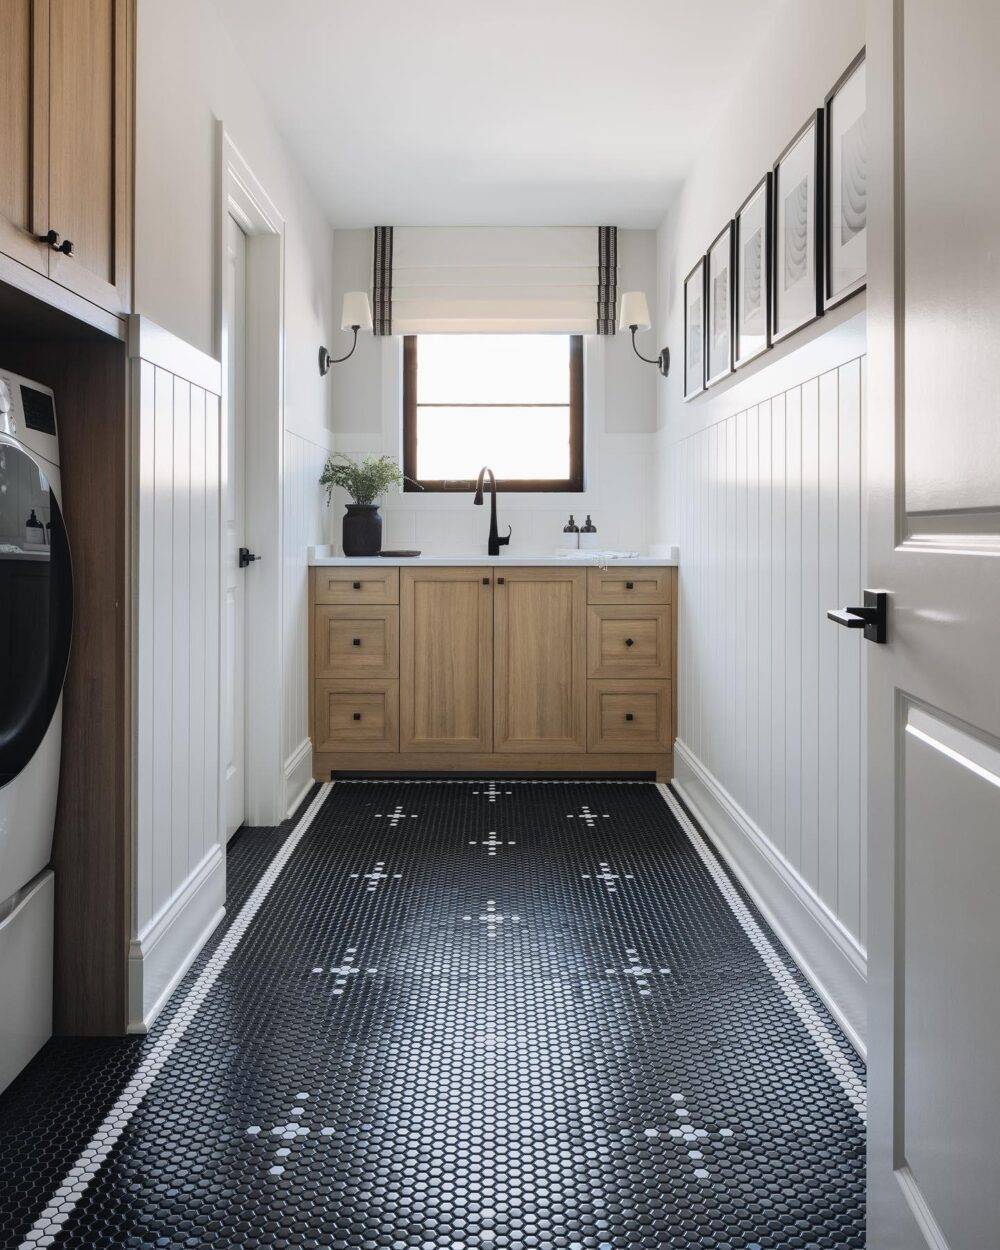 Laundry room with black with a white cross-patterned mosaic floor. Wooden cabinetry. 